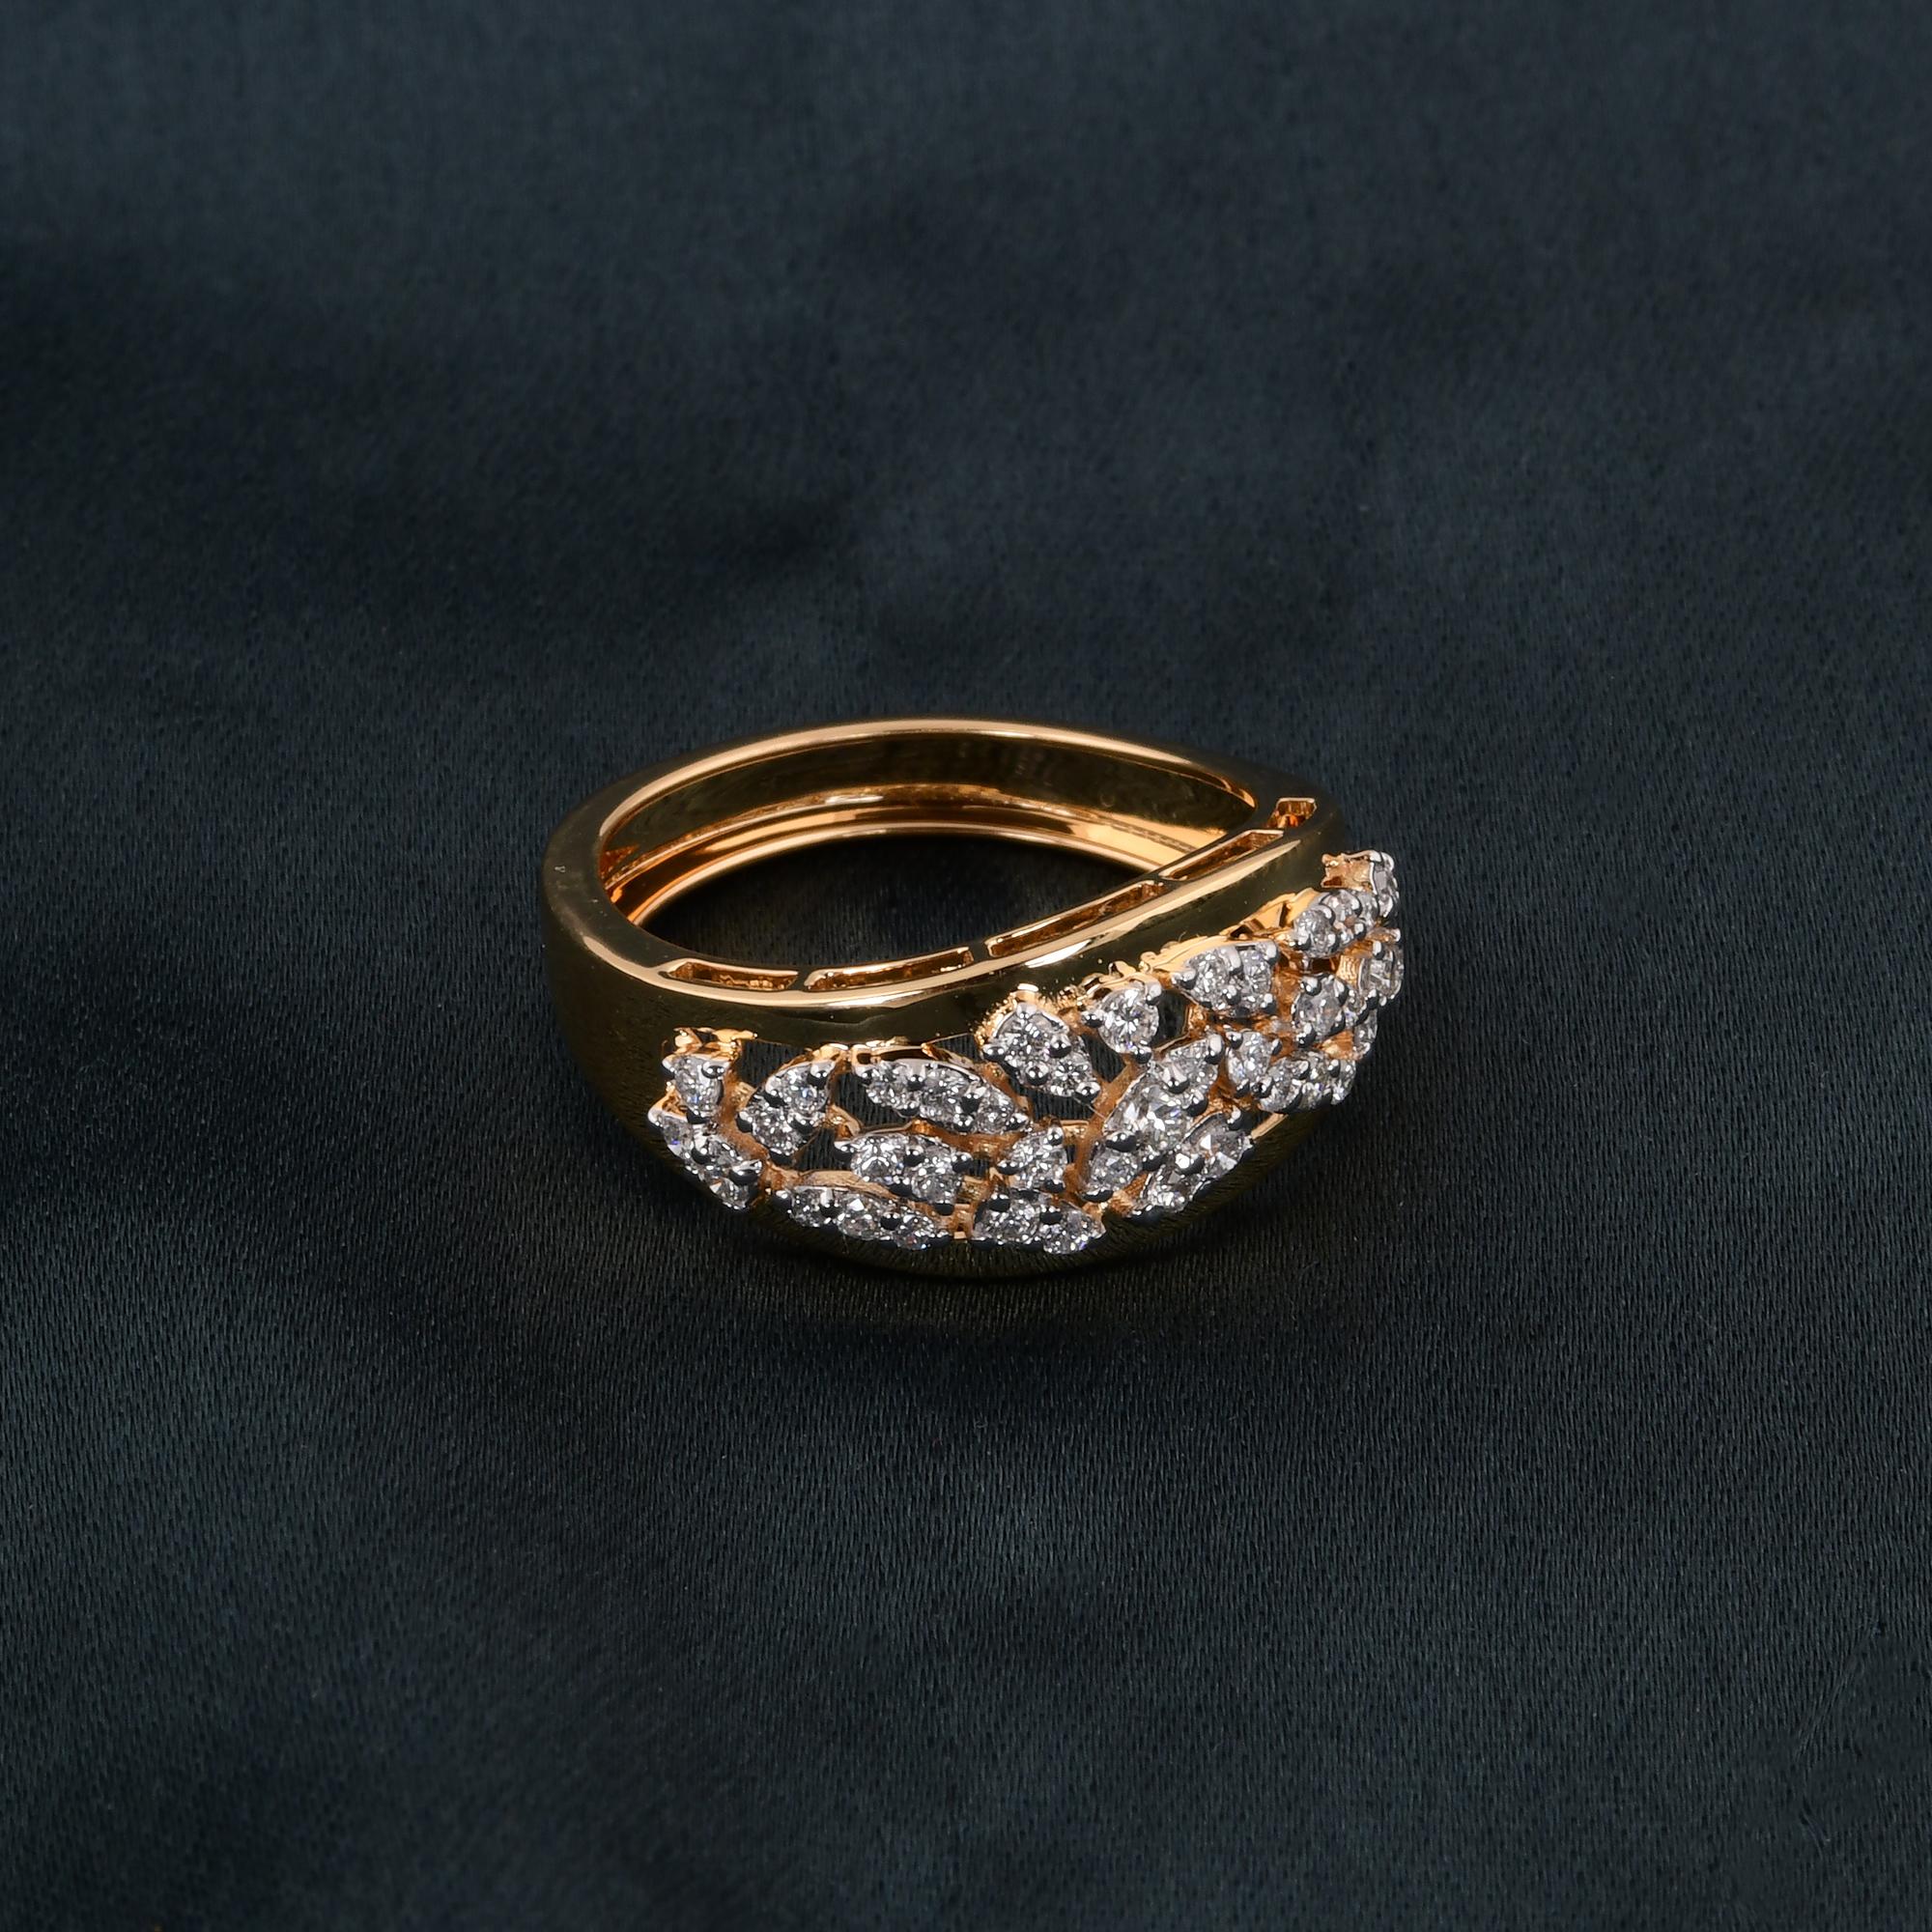 Modern Natural SI Clarity HI Color Round Diamond Ring 14 Karat Yellow Gold Fine Jewelry For Sale